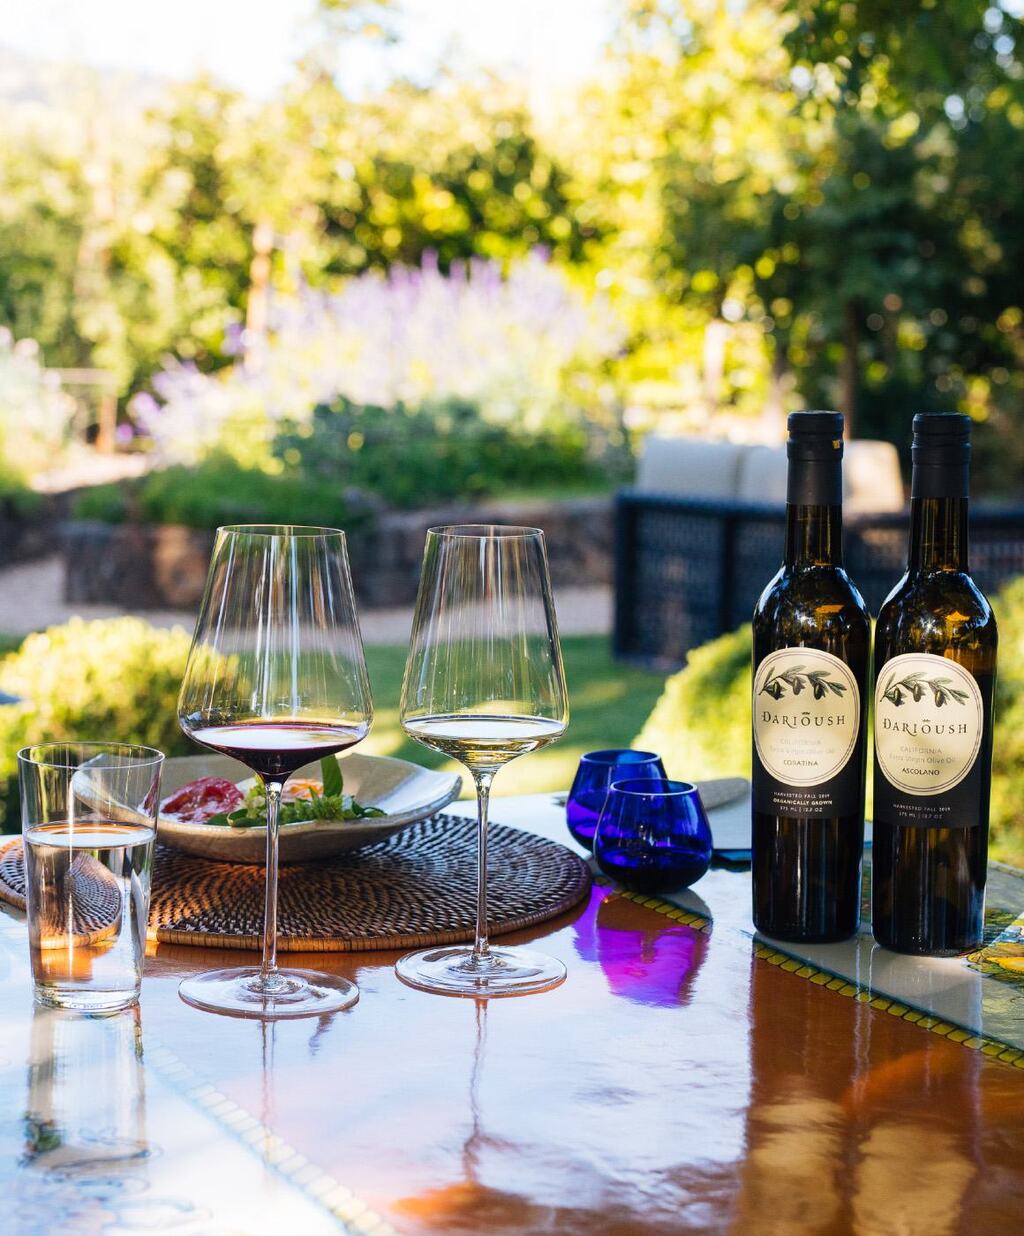 Darioush has worked closely with several olive orchards in California's Yolo and Placer counties to produce fresh, expressive and aromatic olive oils. As with the grapes we grow and vines we tend, our olive farmers are committed to respect and care for the land.